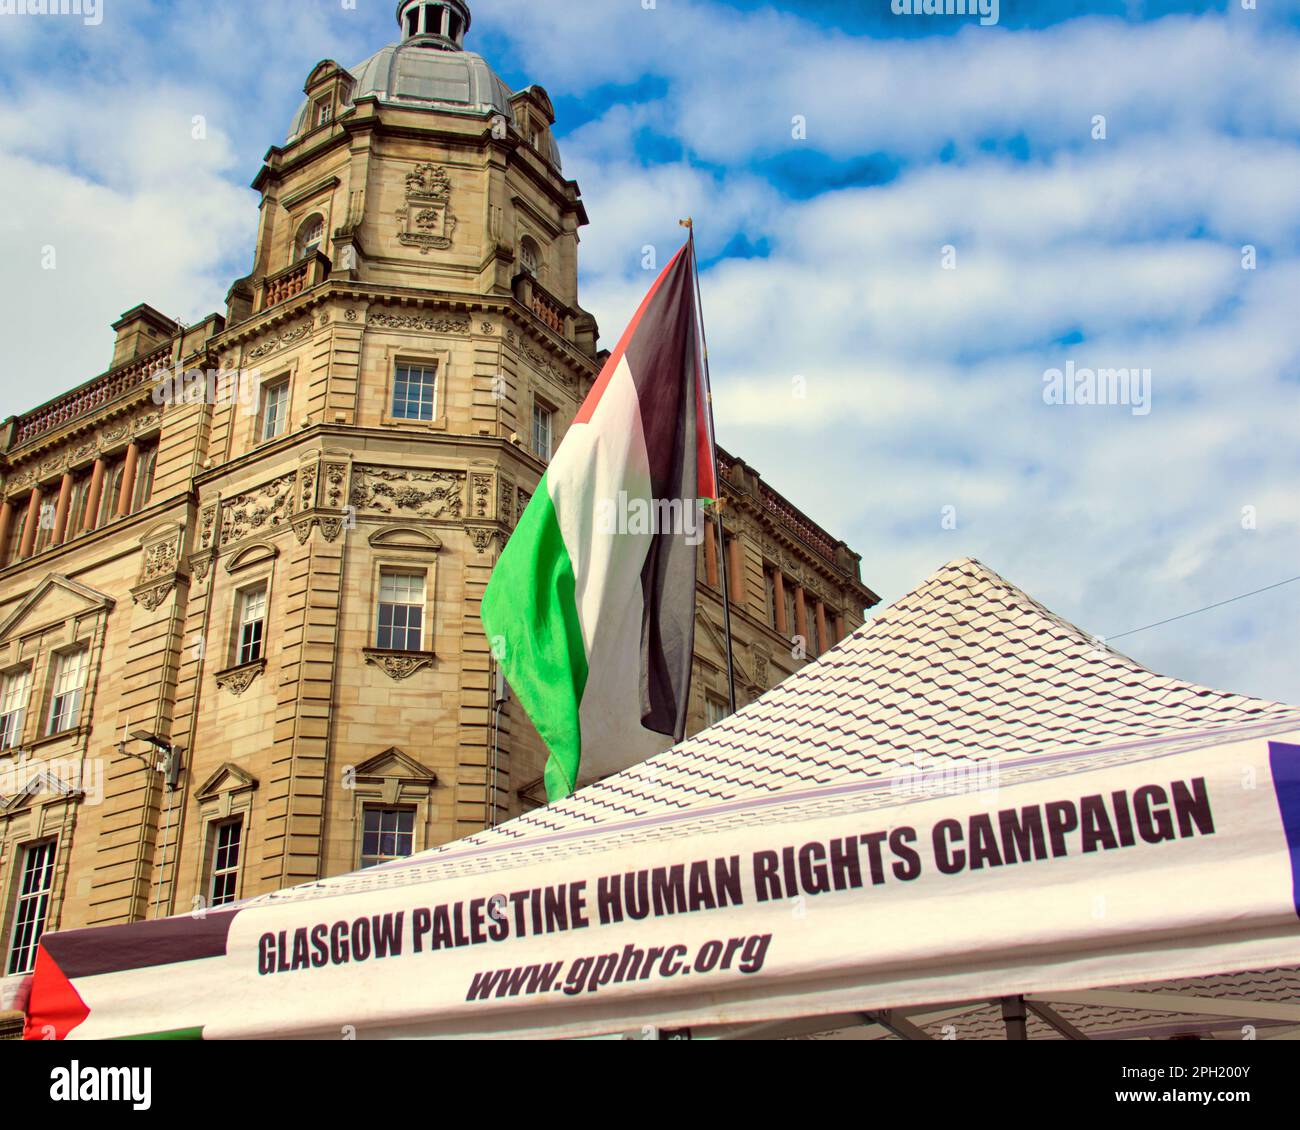 glasgow palestine human rights campaign canopy on stall Stock Photo